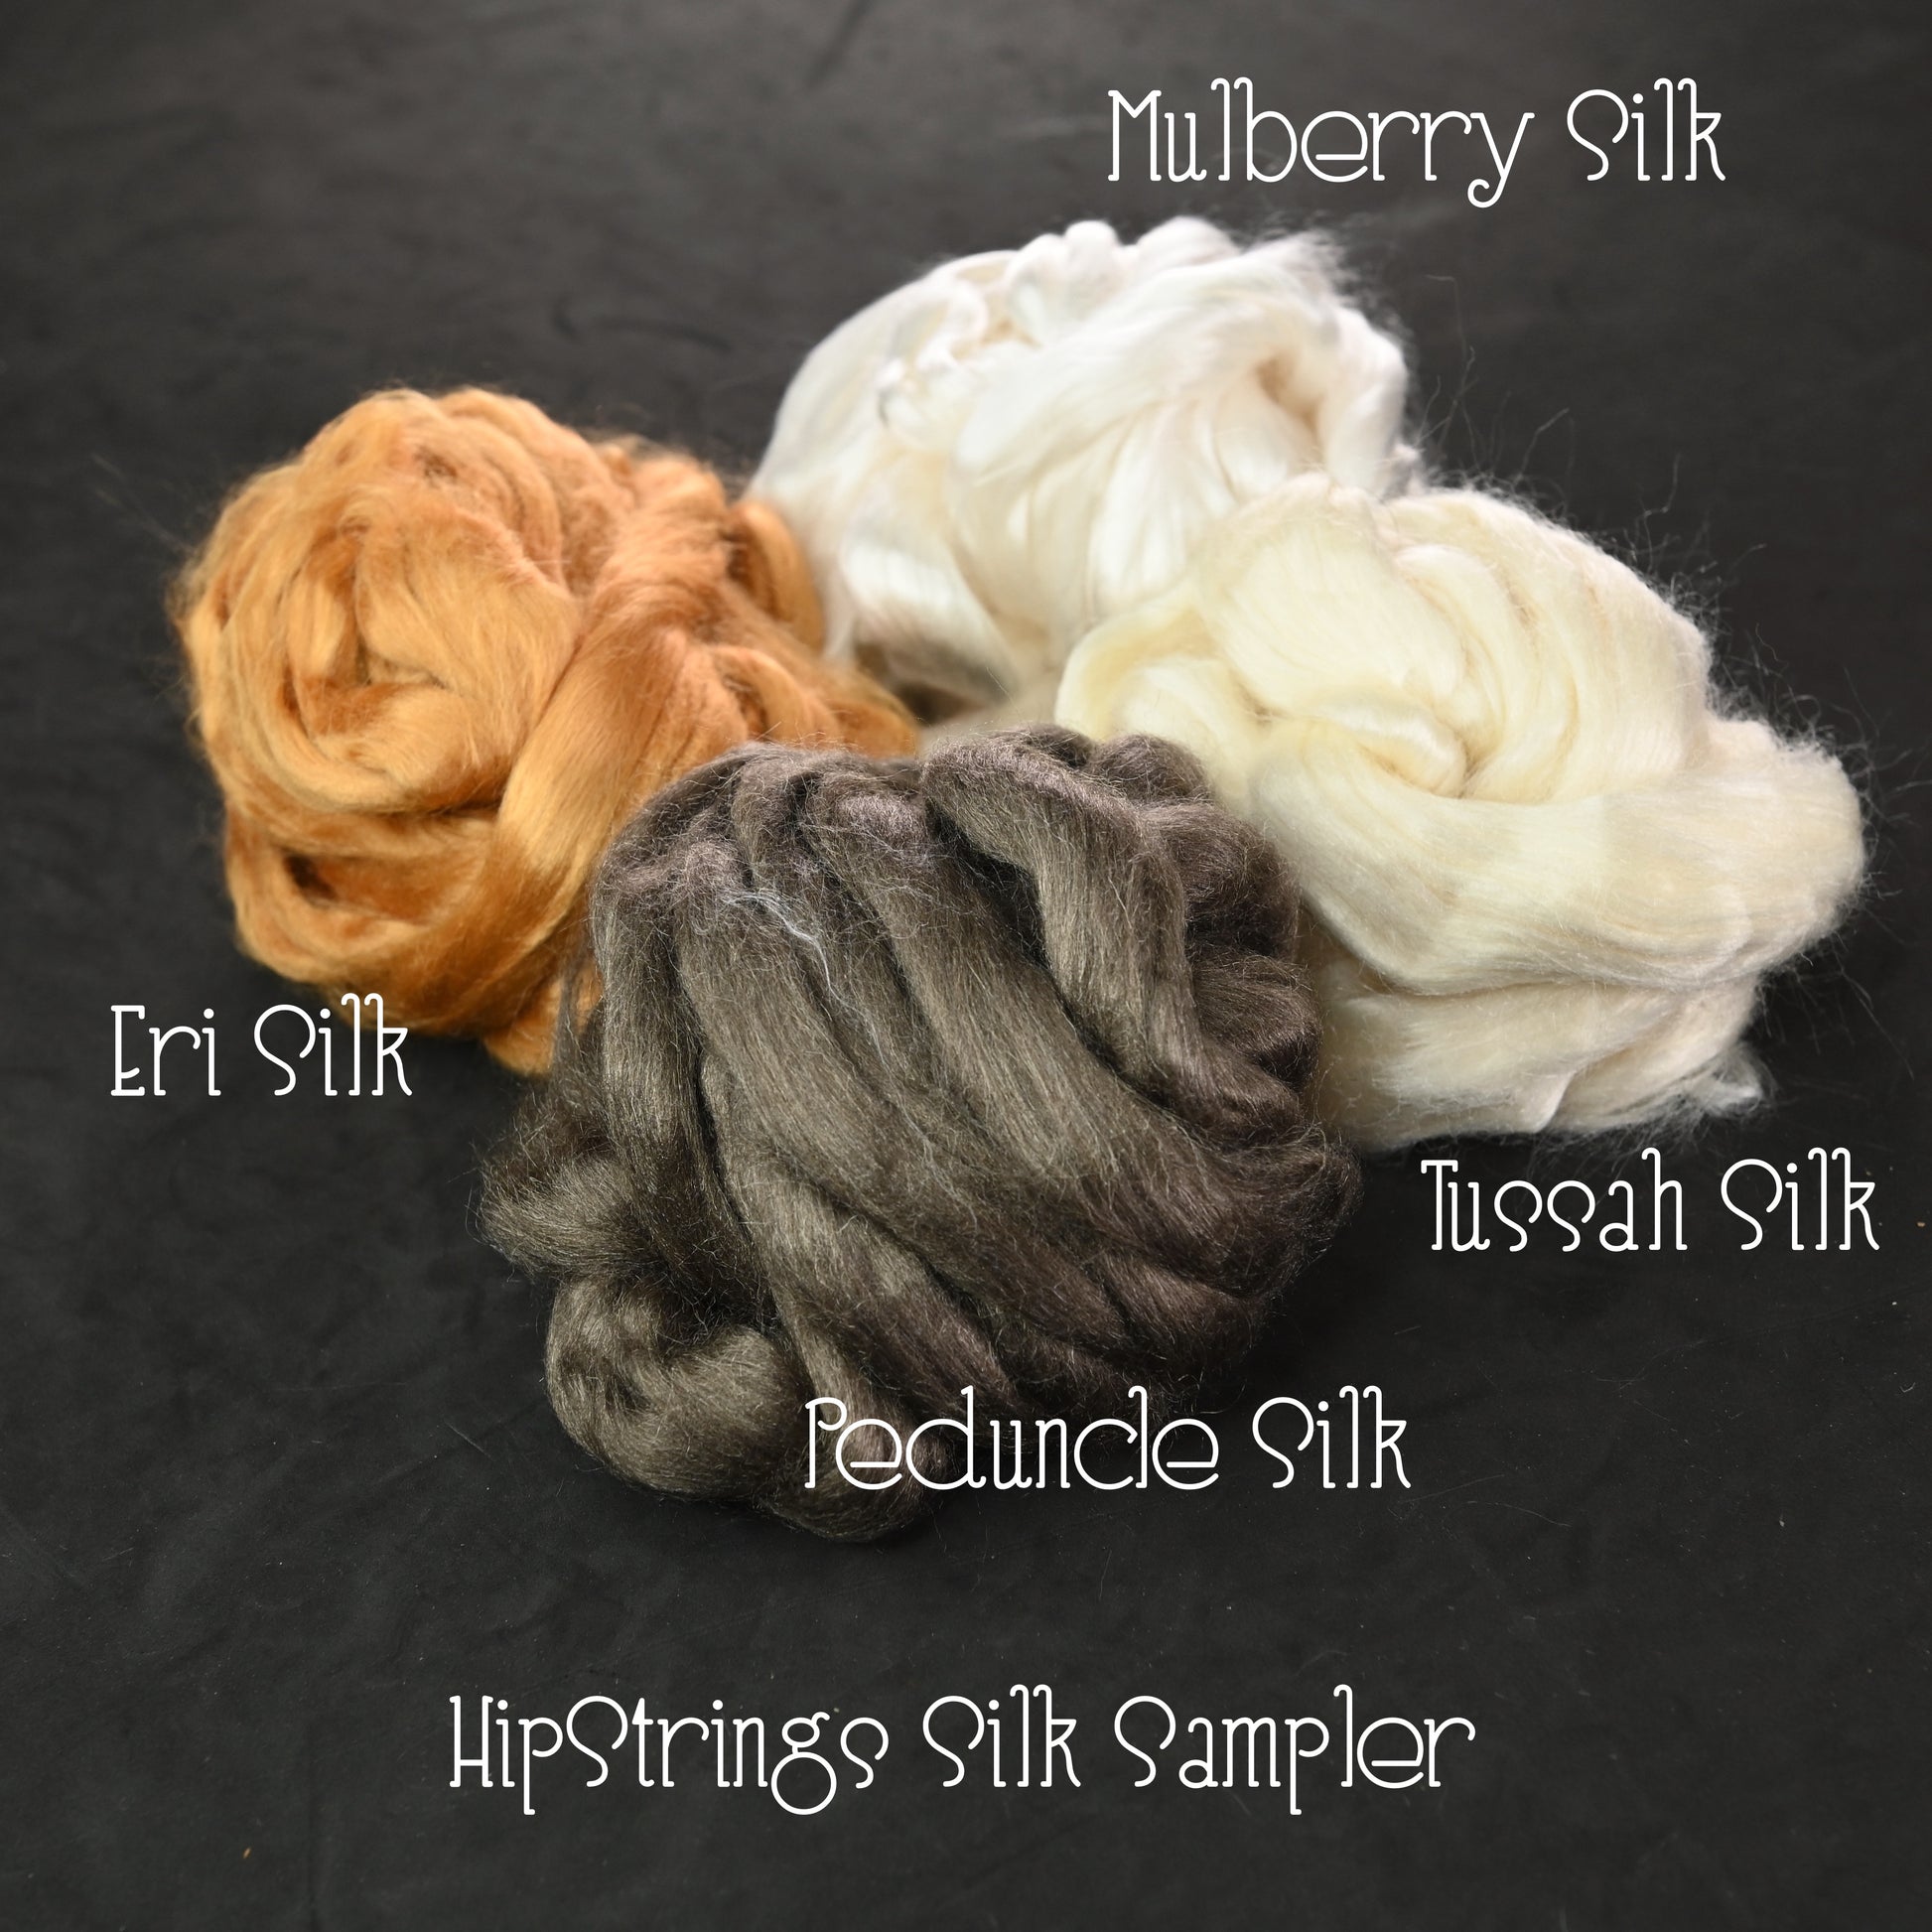 What is Mulberry Silk?